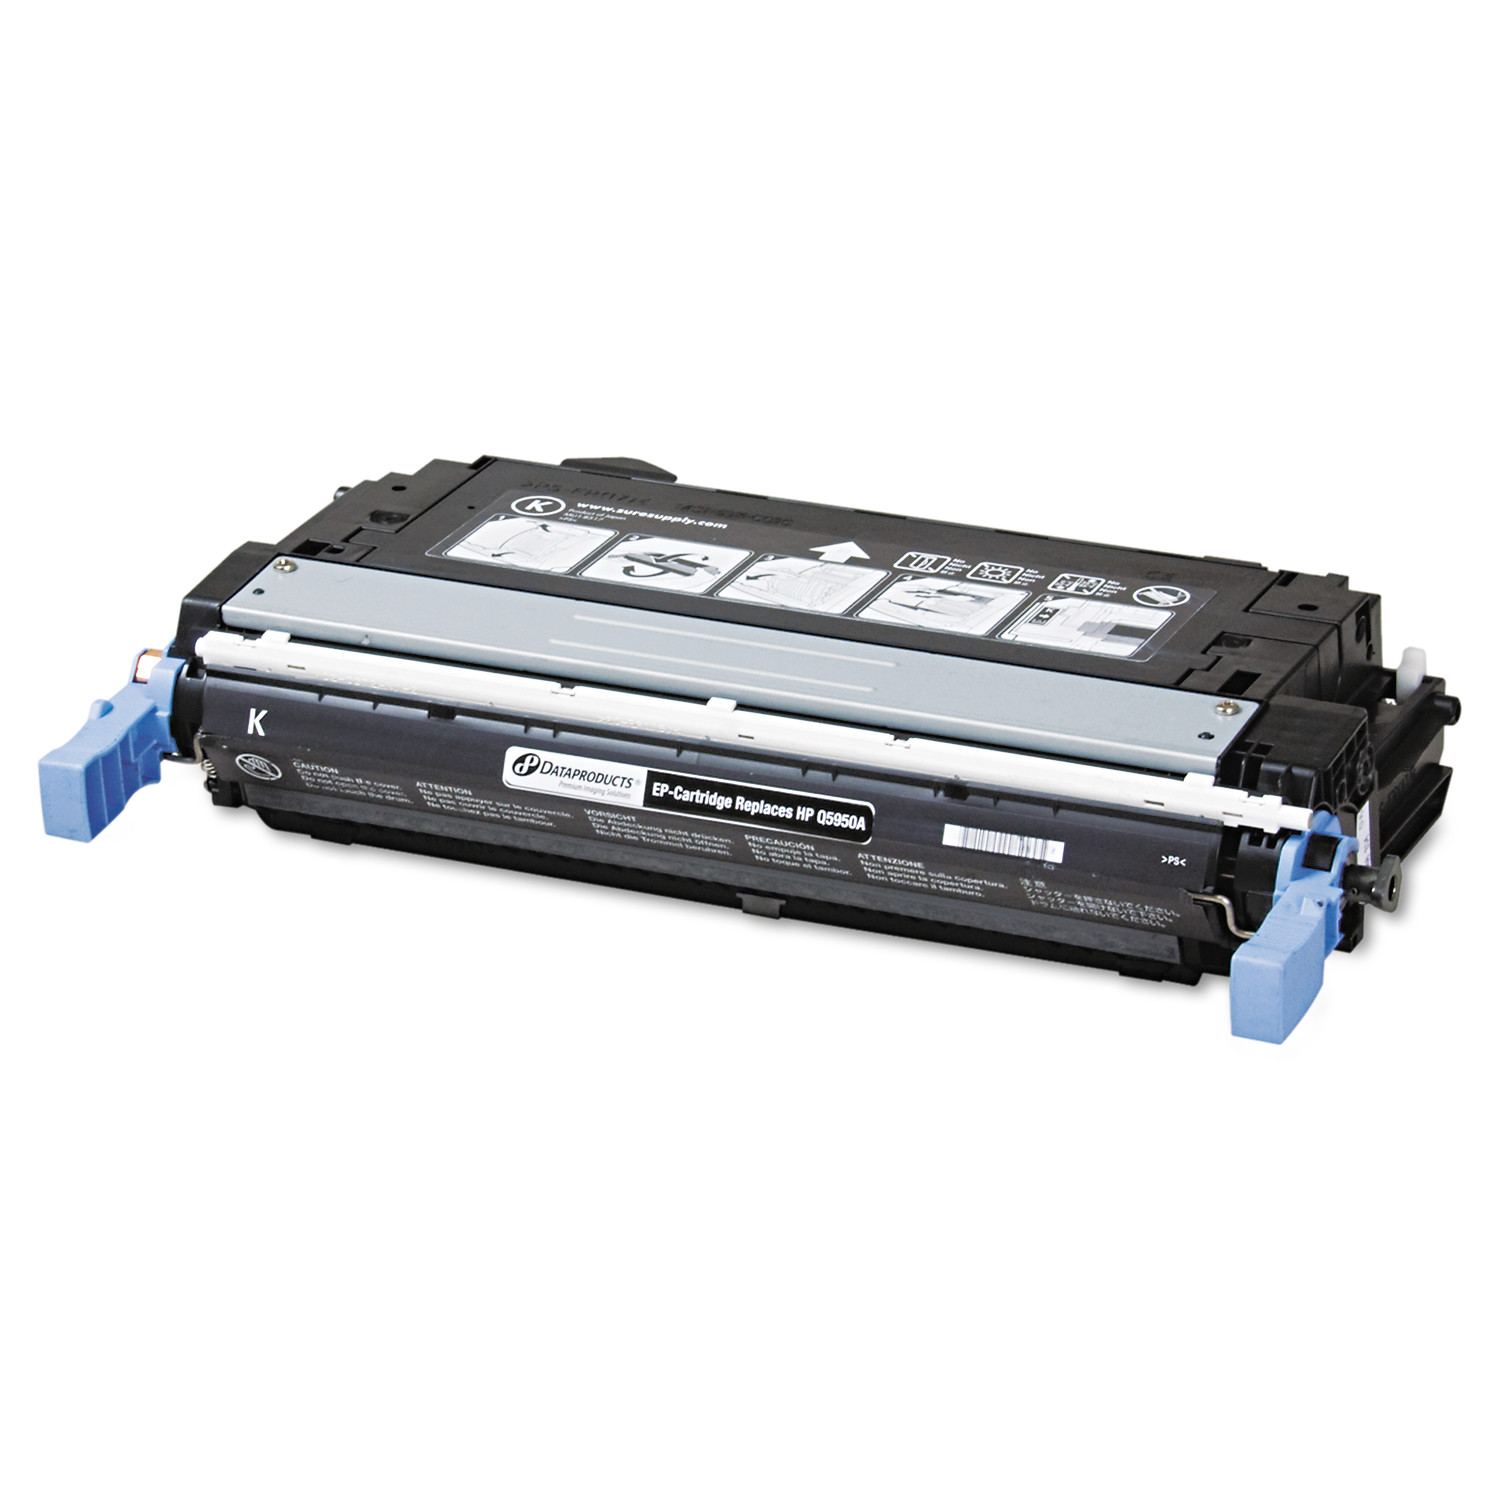 Dataproducts Remanufactured Q5950A (643A) Toner, Black - image 1 of 2